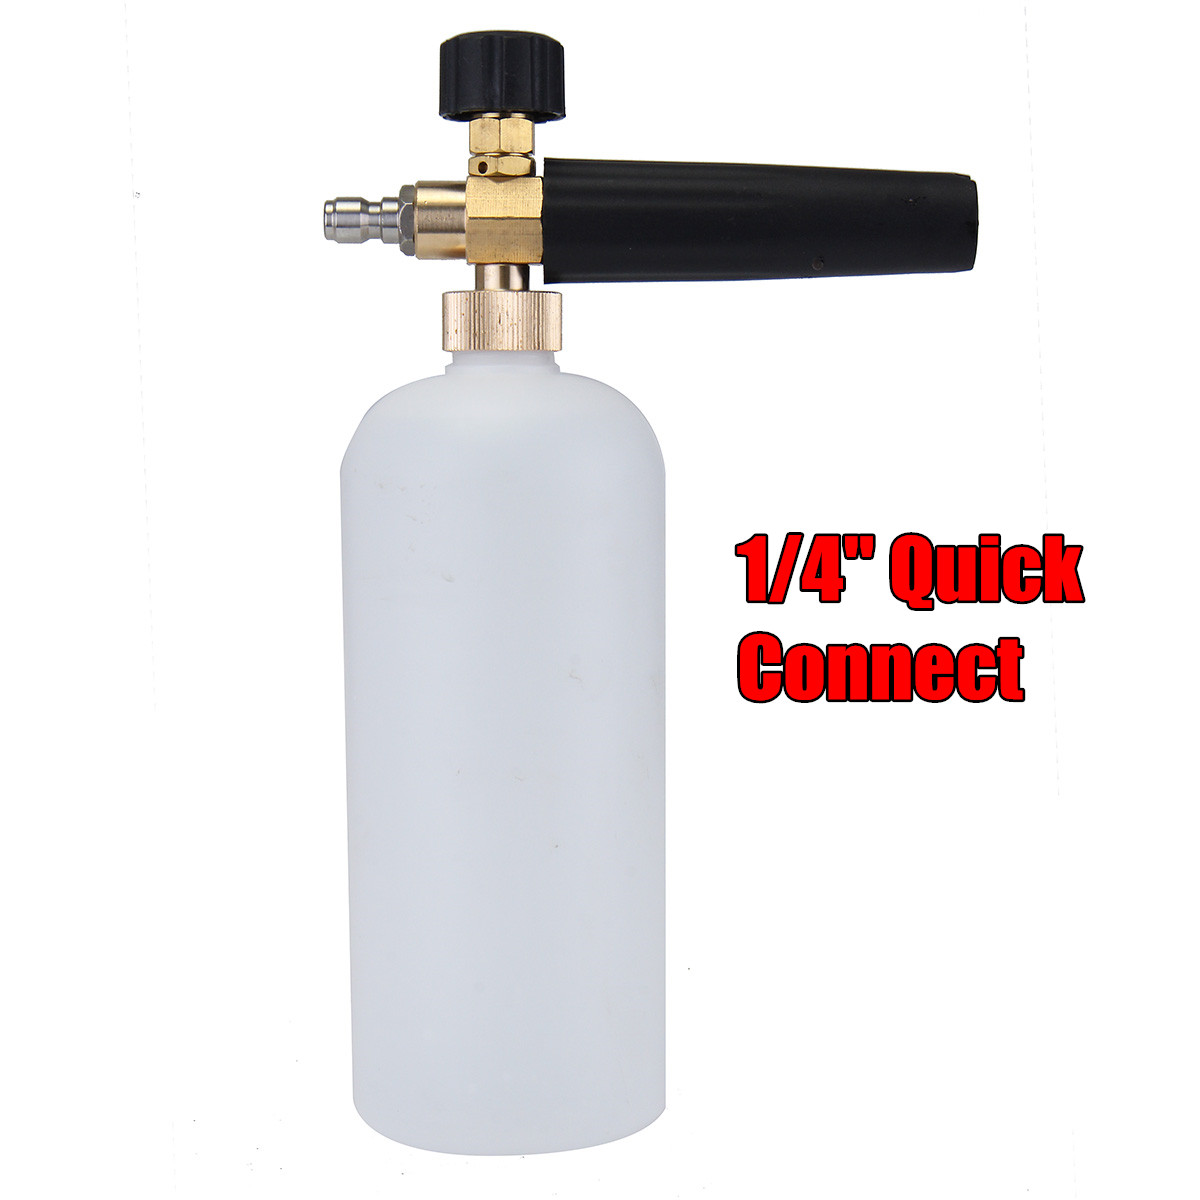 High-Pressure-Washer-Jet-14quot-Snow-Foam-Lance-Cannon-Car-Clean-Washer-Bottle-1374822-2